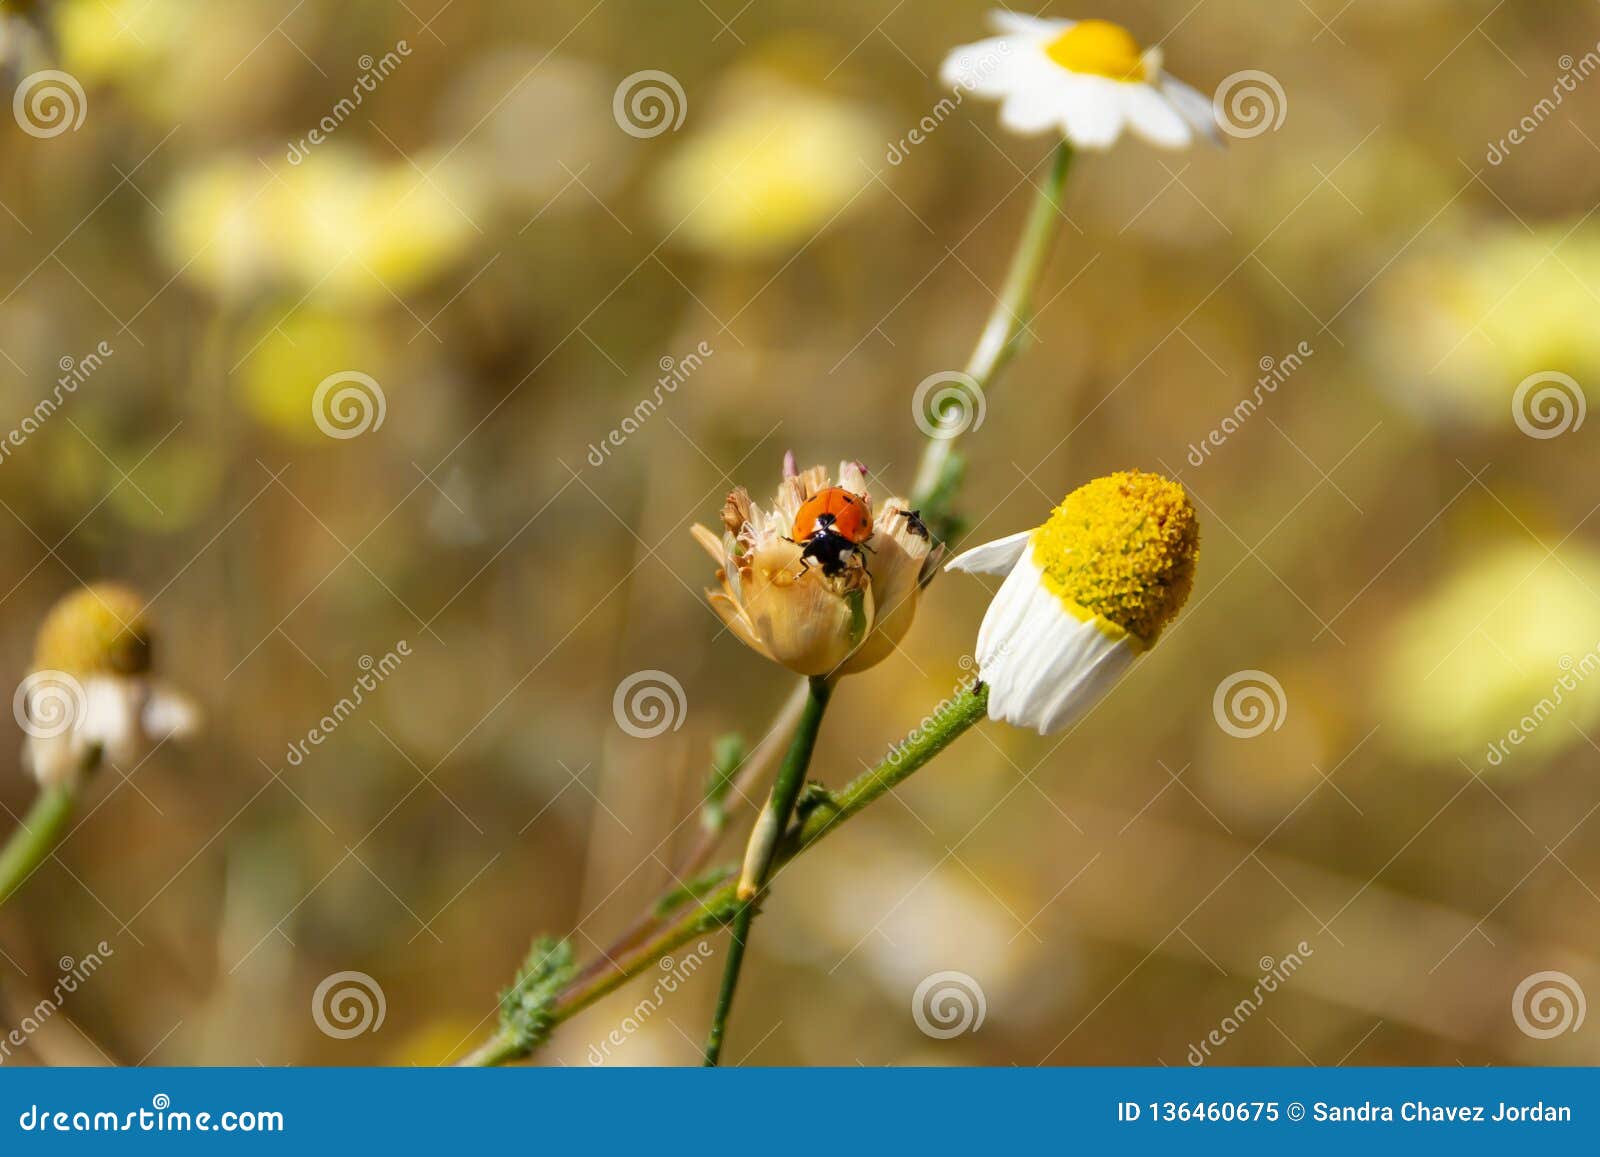 ladybug in a daisy flower, spring is here